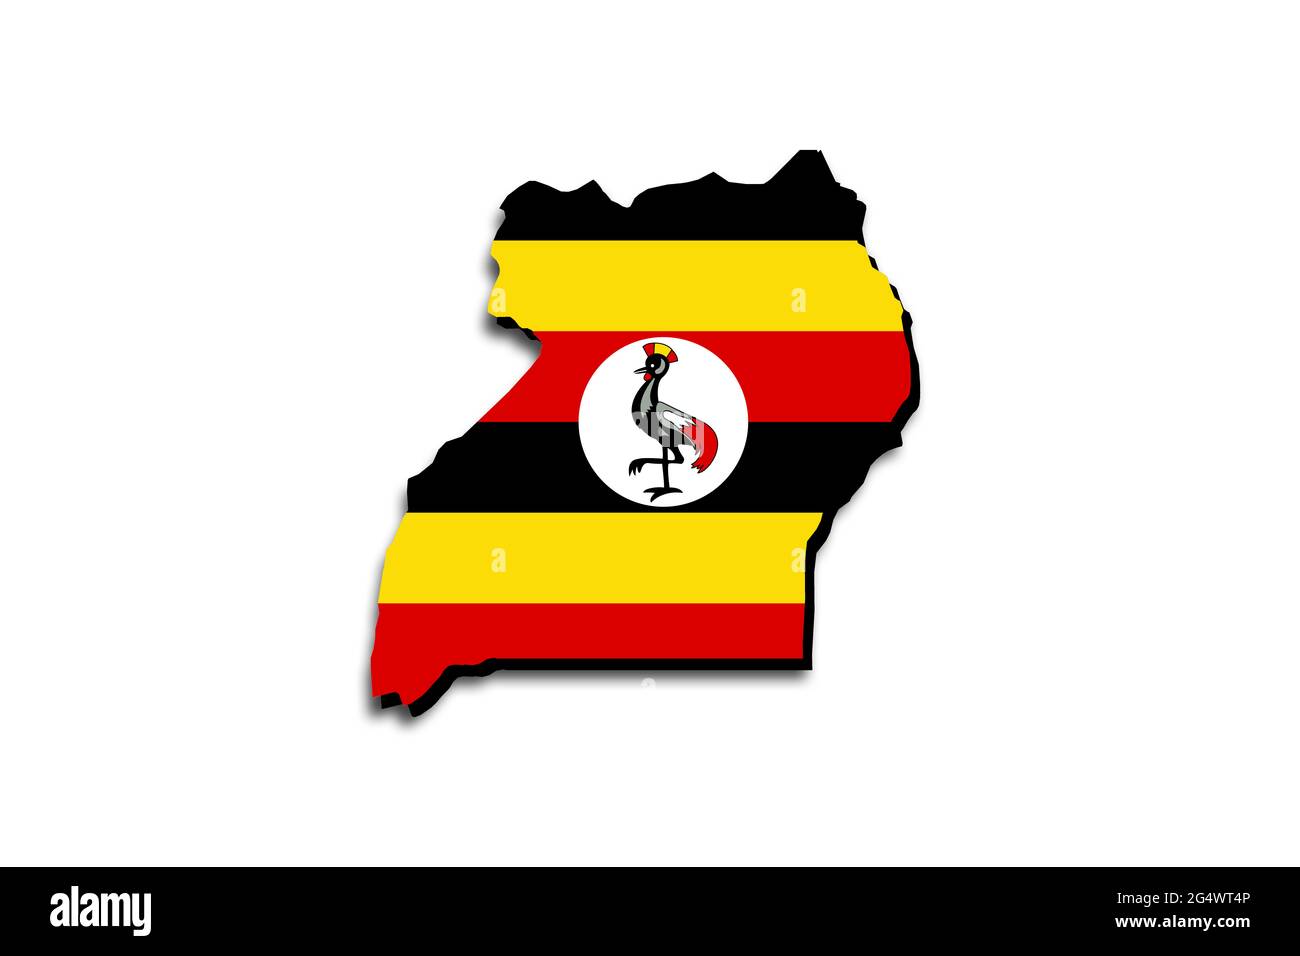 Outline map of Uganda with the national flag superimposed over the country. 3D graphics casting a shadow on the white background Stock Photo